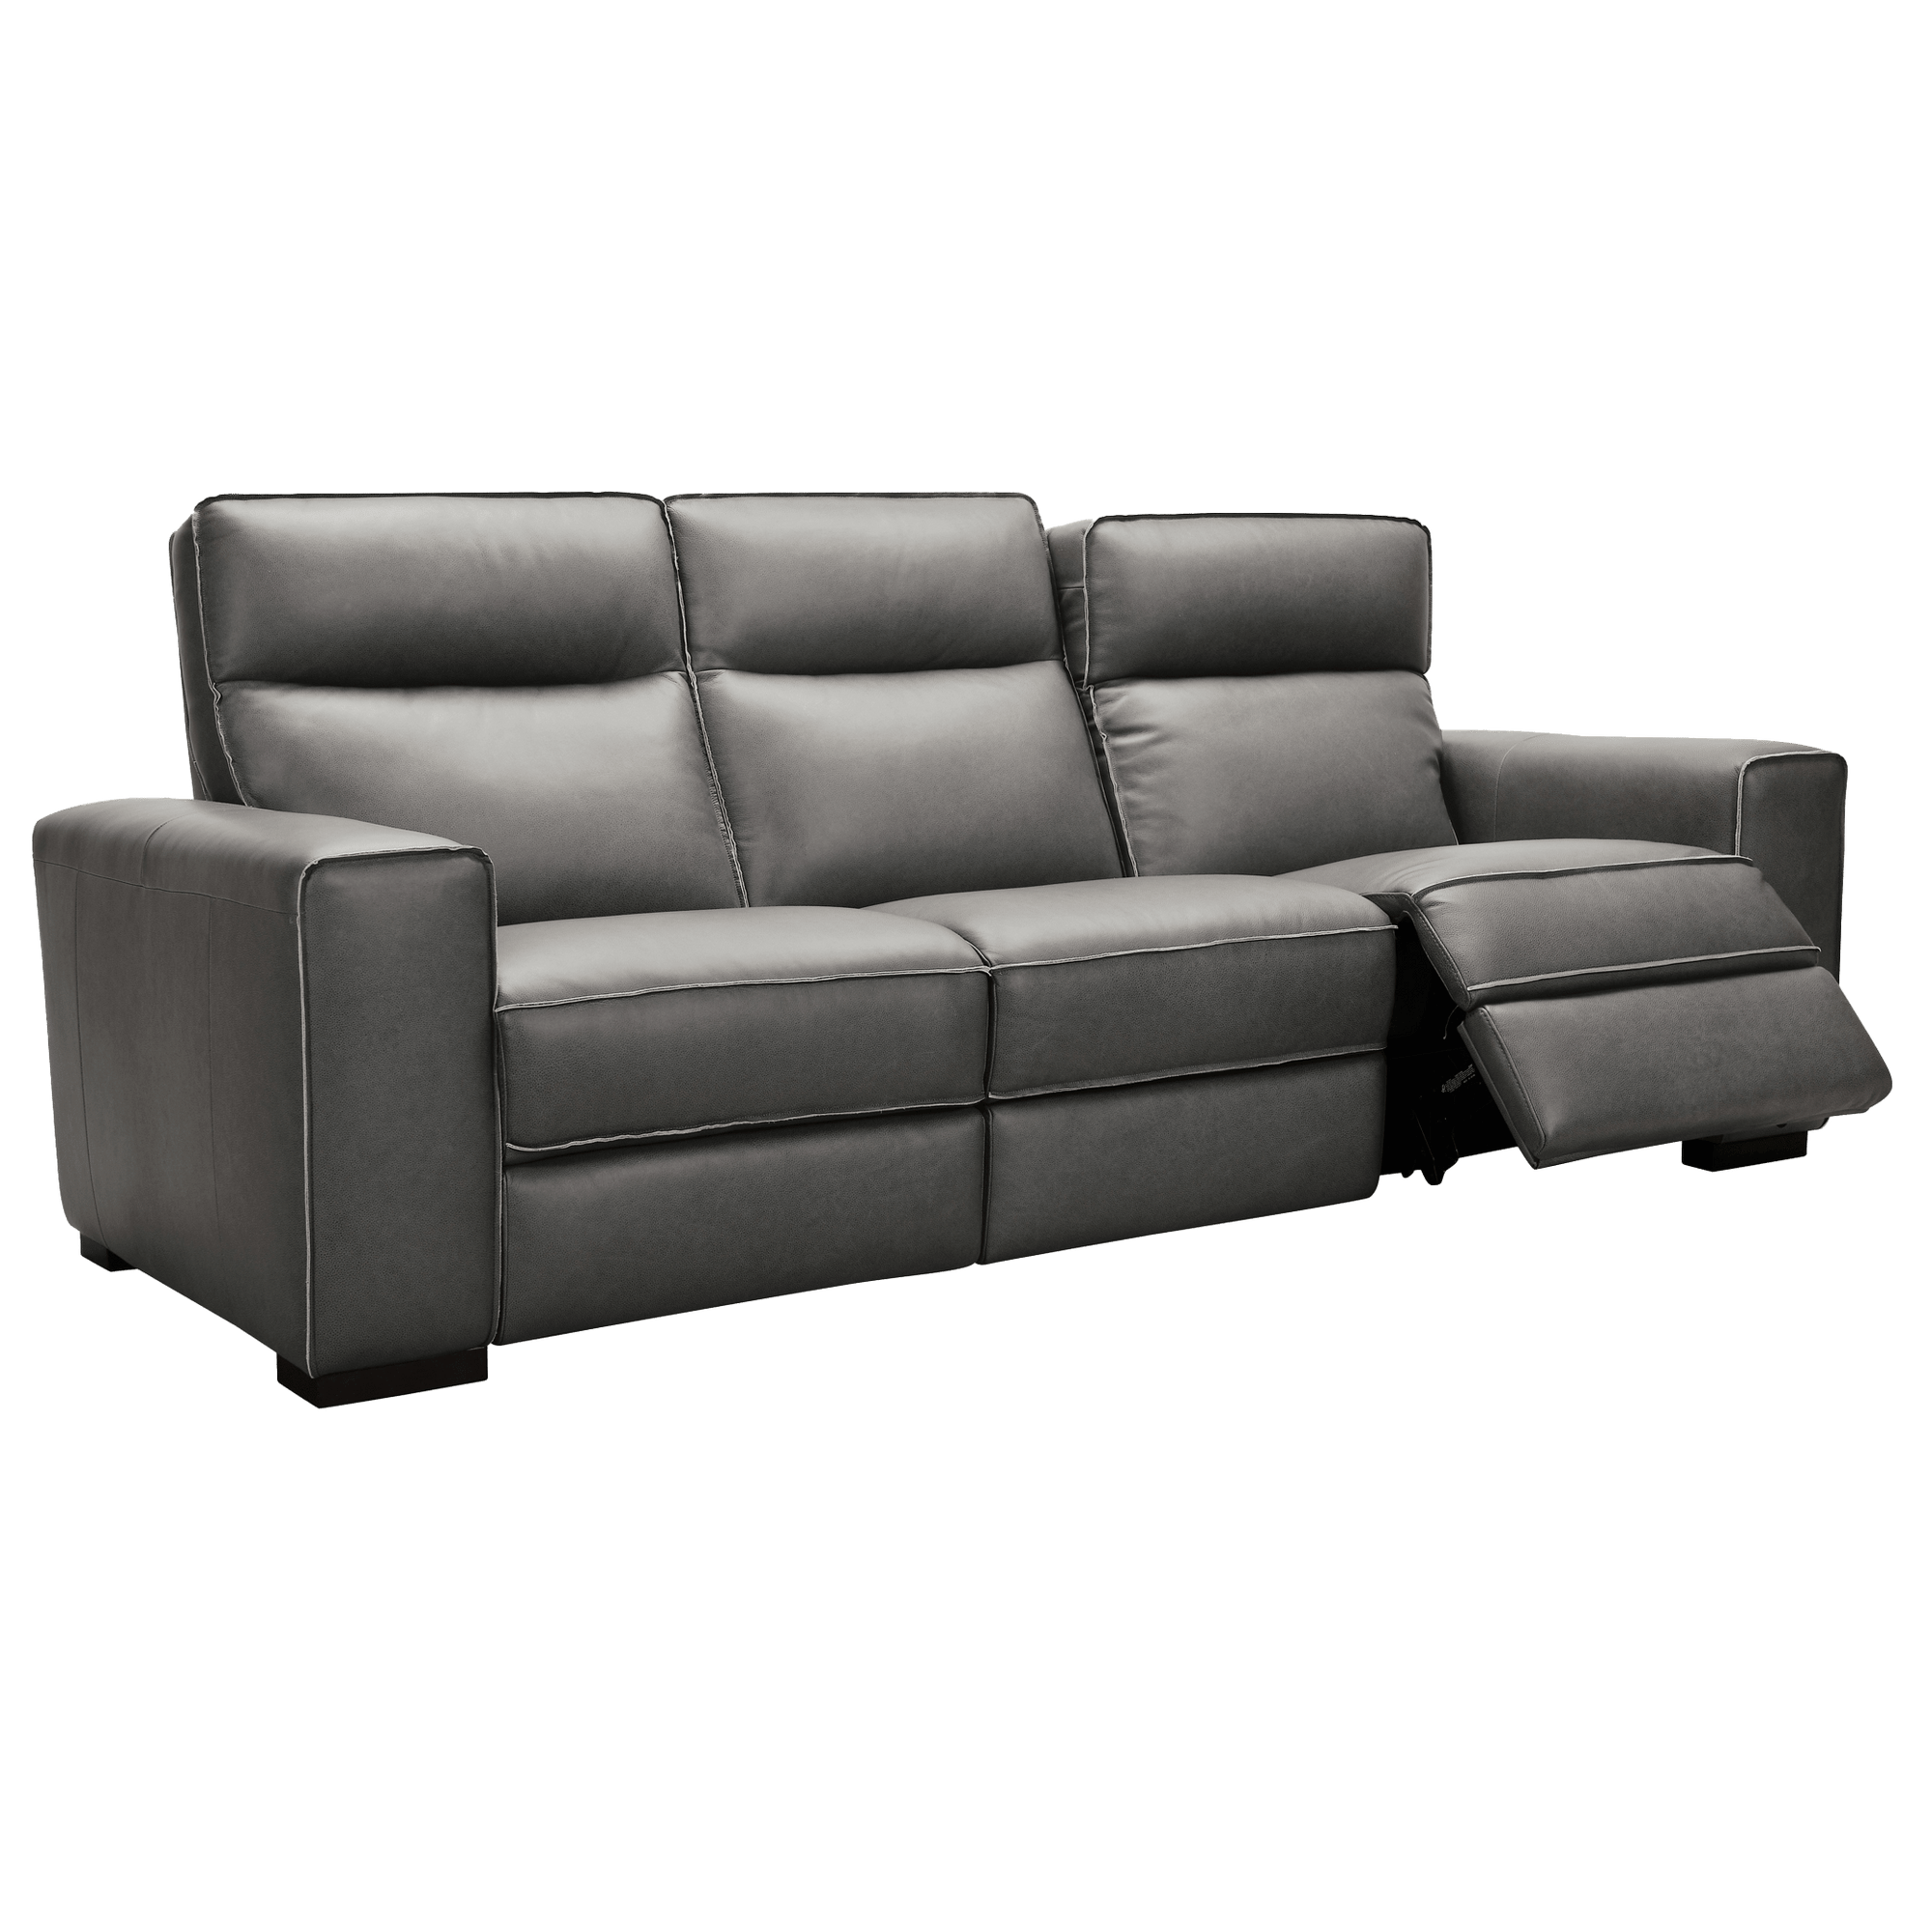 Baxlee 95" Wide Upholstered Leather Sofa, Gray